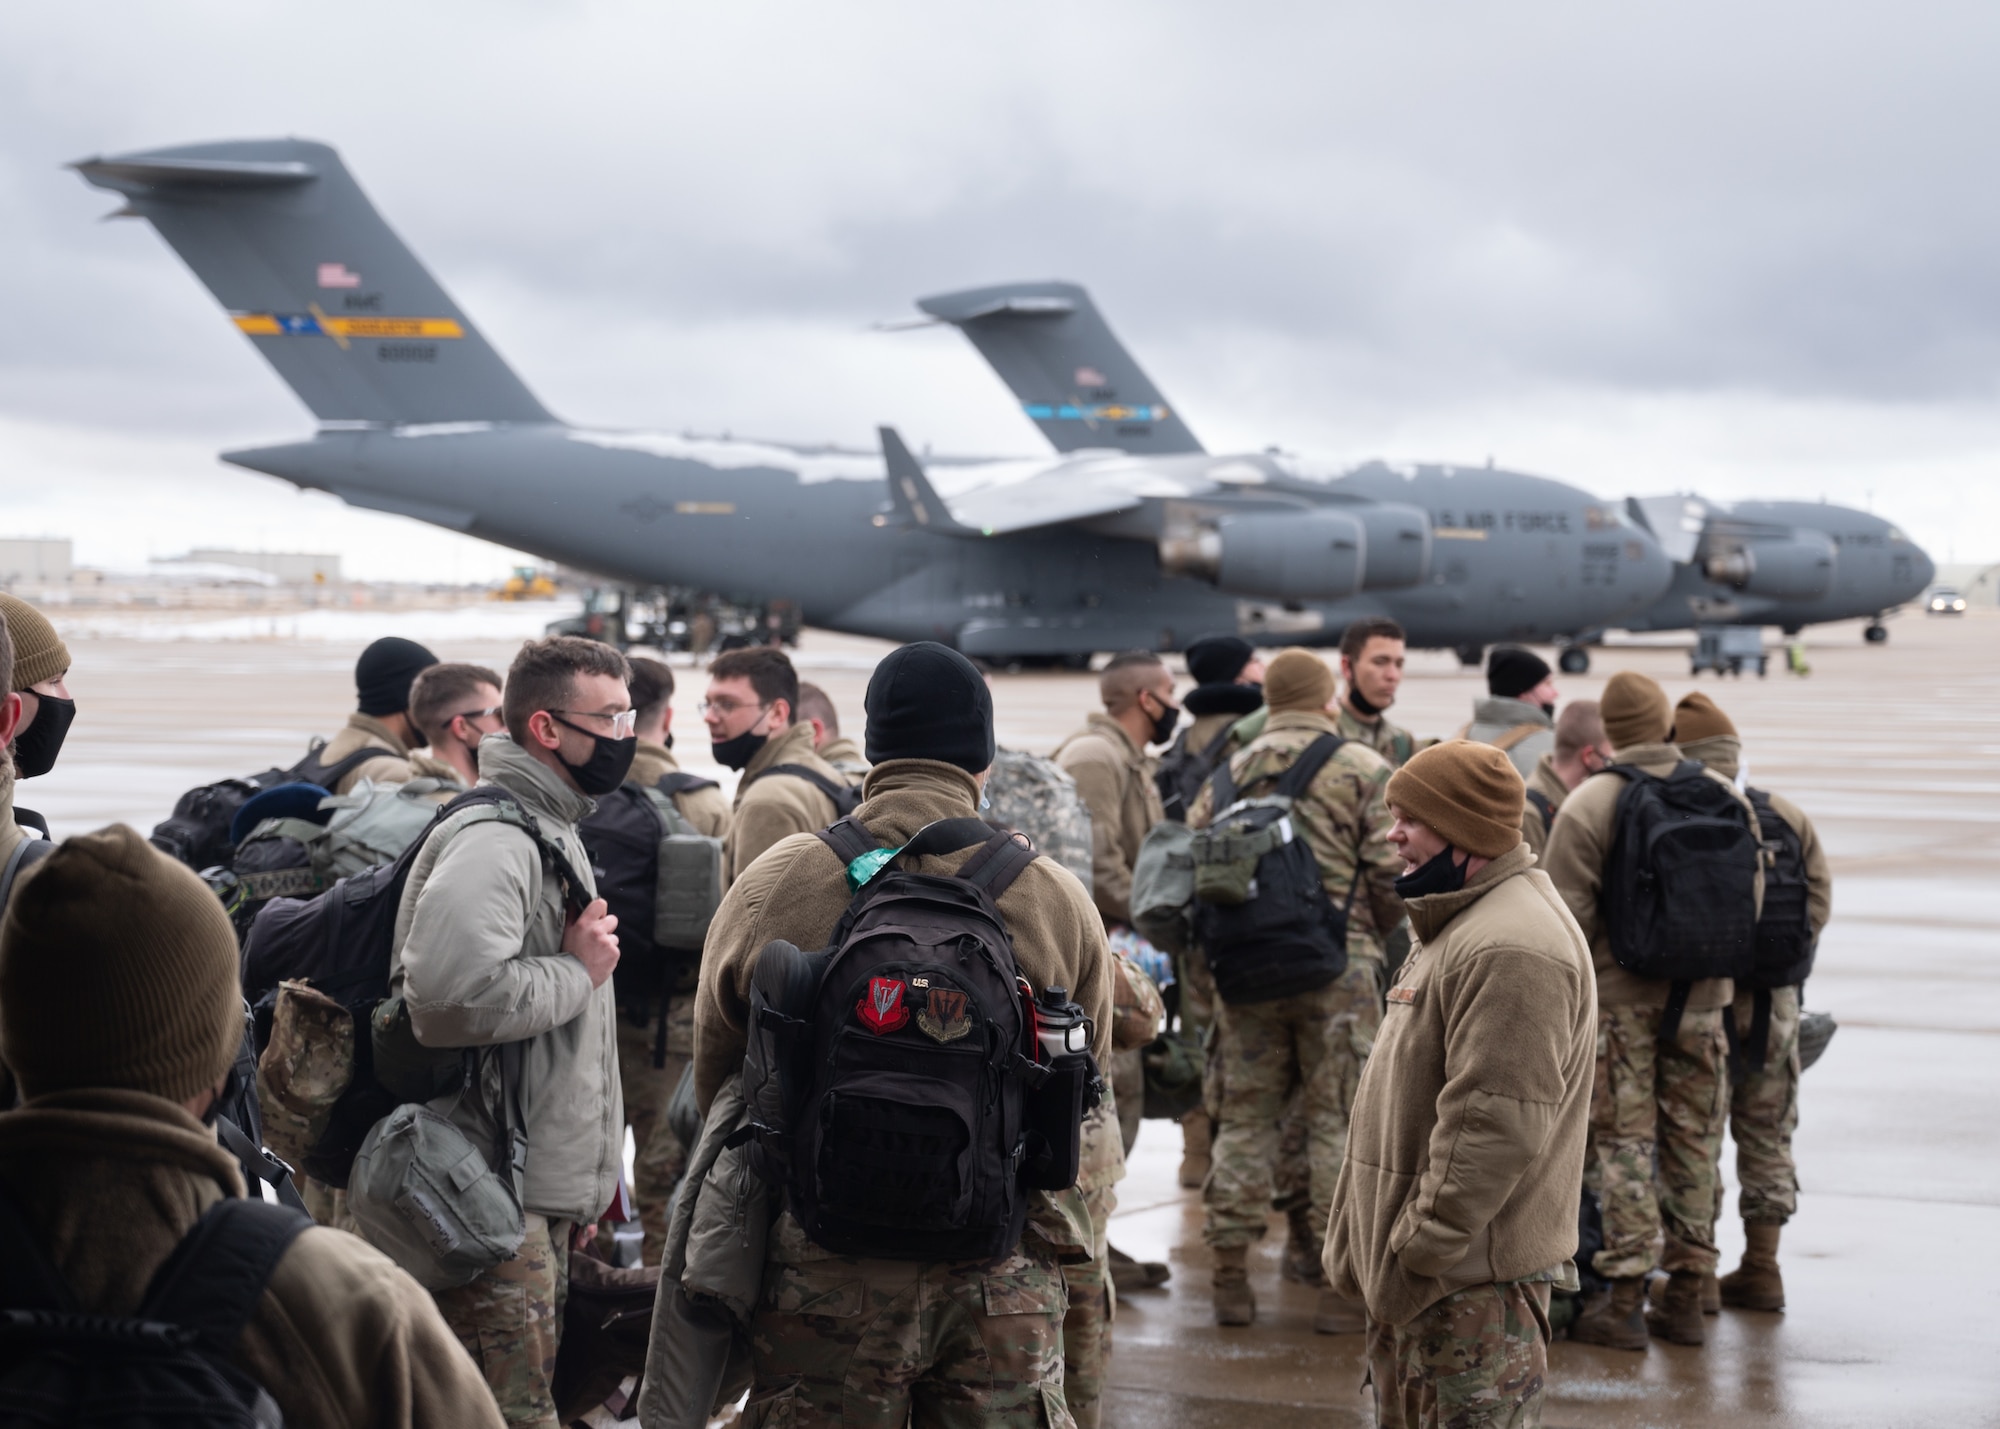 A photo of Airmen boarding a plane for deployment